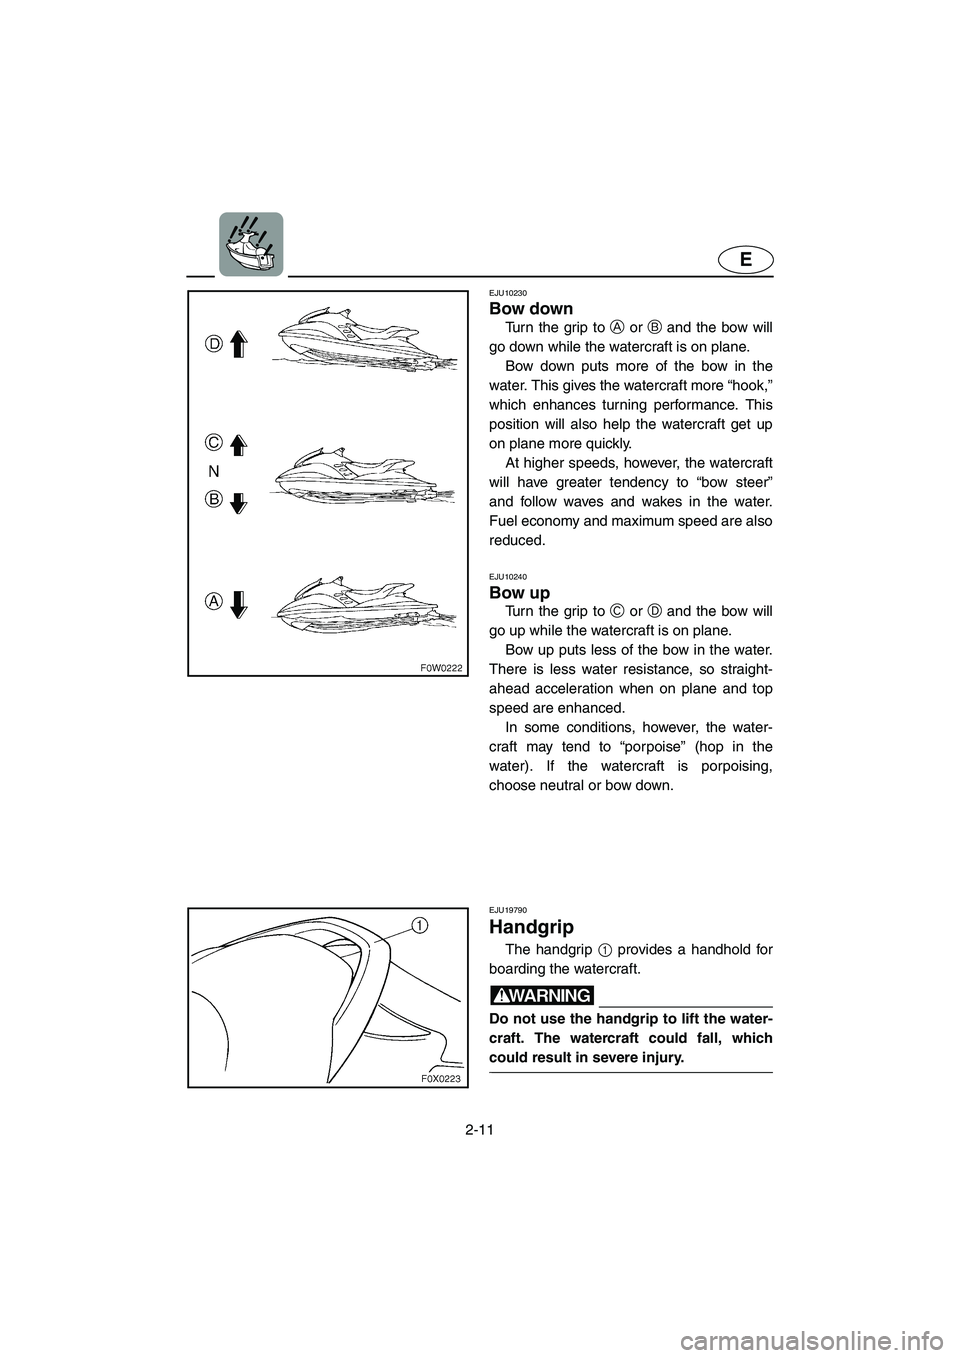 YAMAHA GP1300R 2005  Owners Manual 2-11
E
EJU10230 
Bow down  
Turn the grip to A or B and the bow will
go down while the watercraft is on plane. 
Bow down puts more of the bow in the
water. This gives the watercraft more “hook,”
w